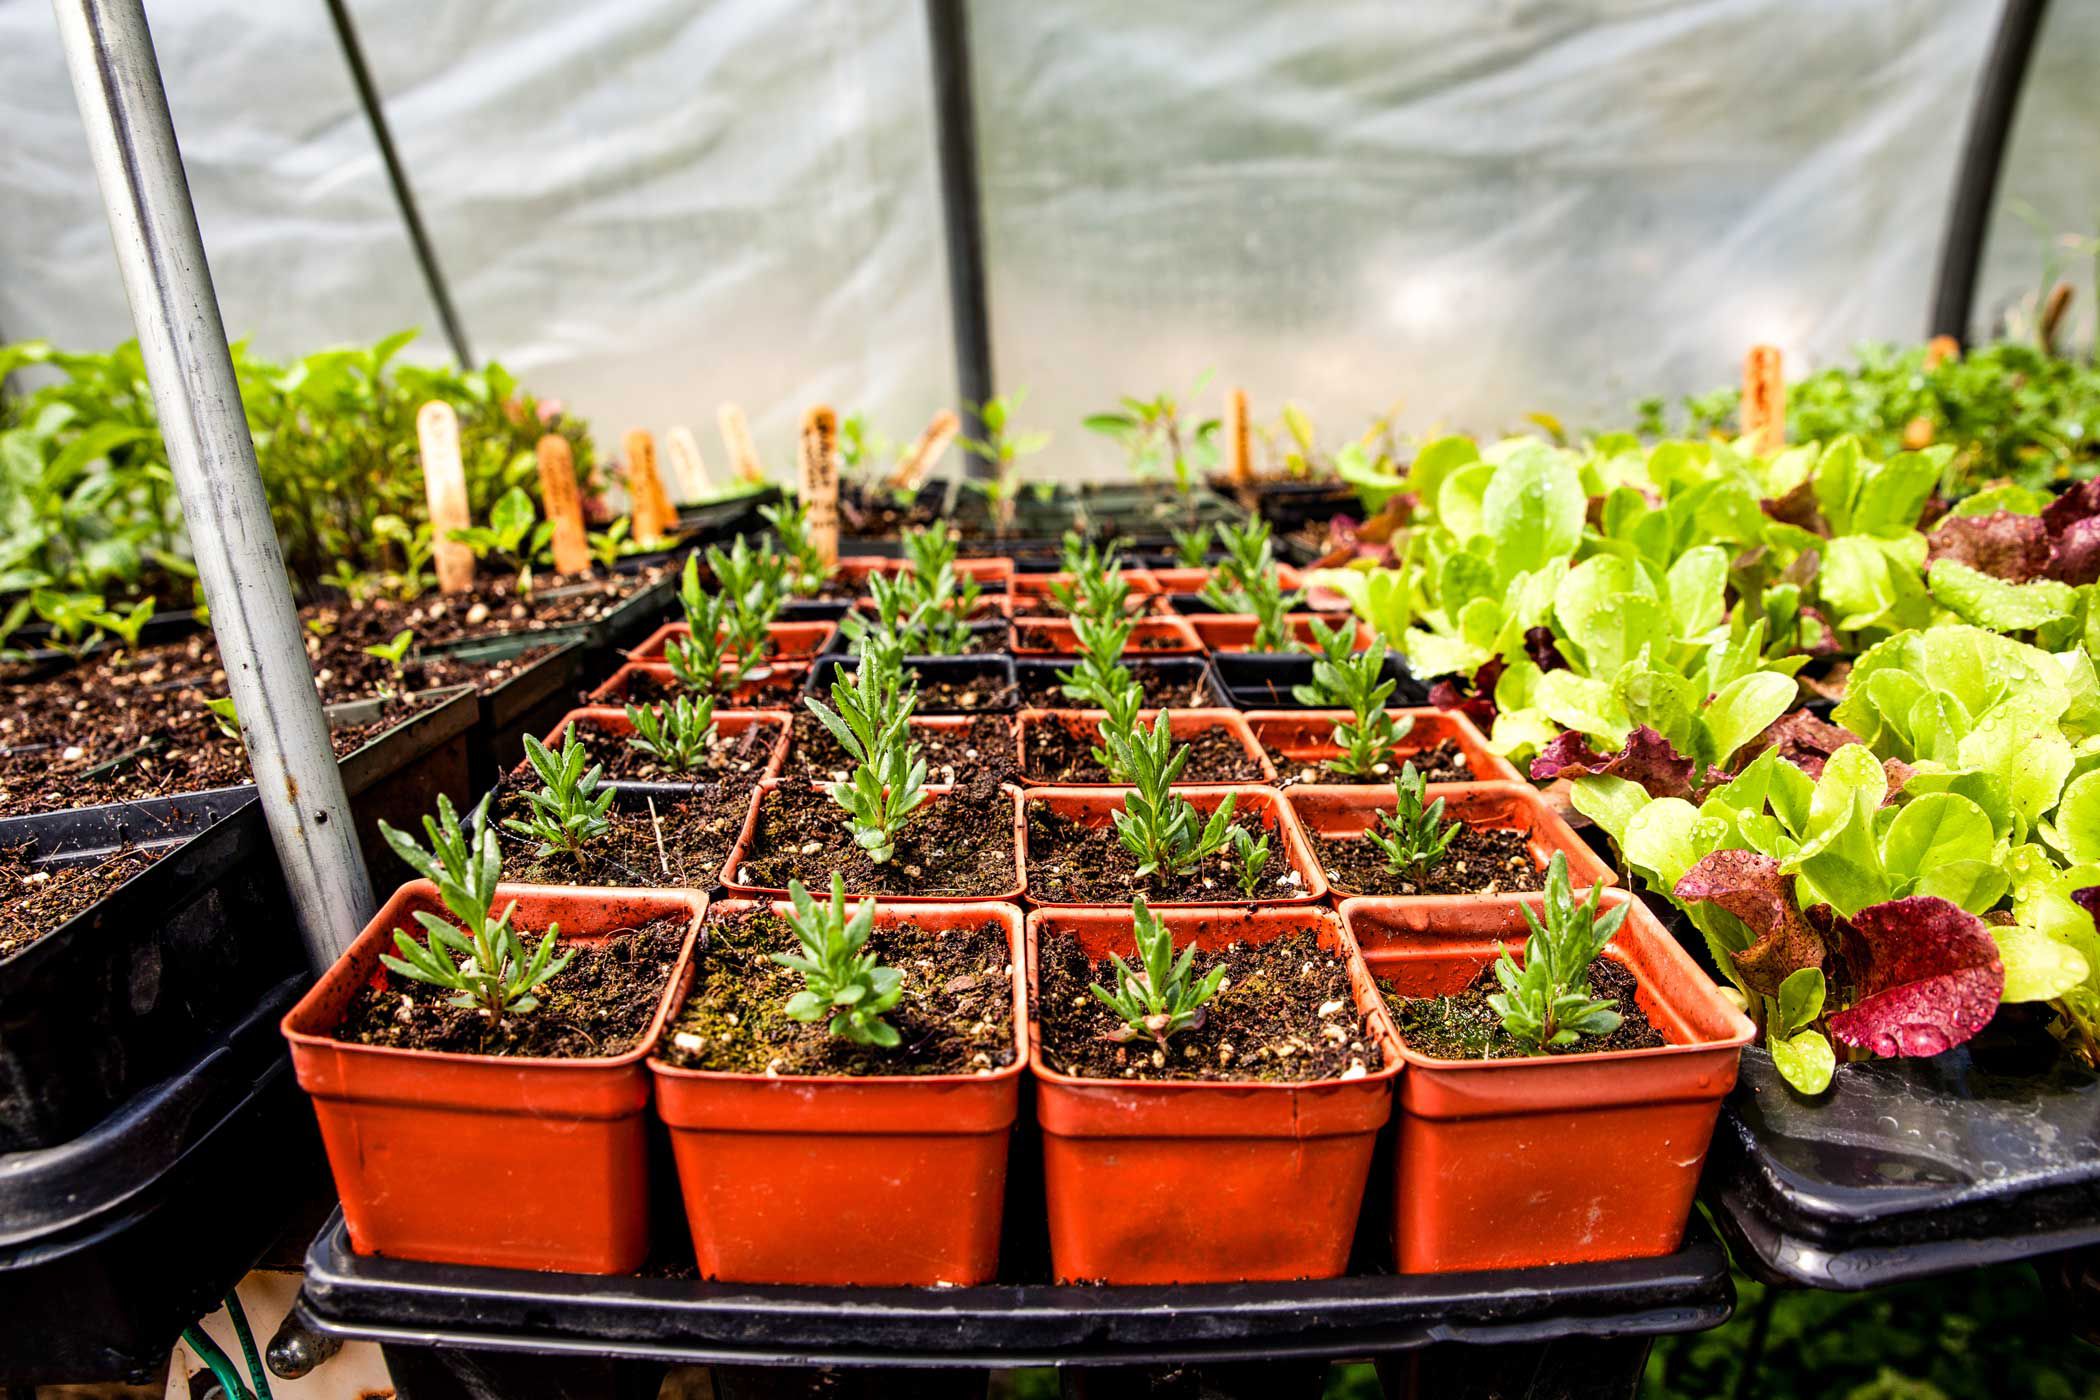 A set of individually potted budding rosemary plants in a nursery.